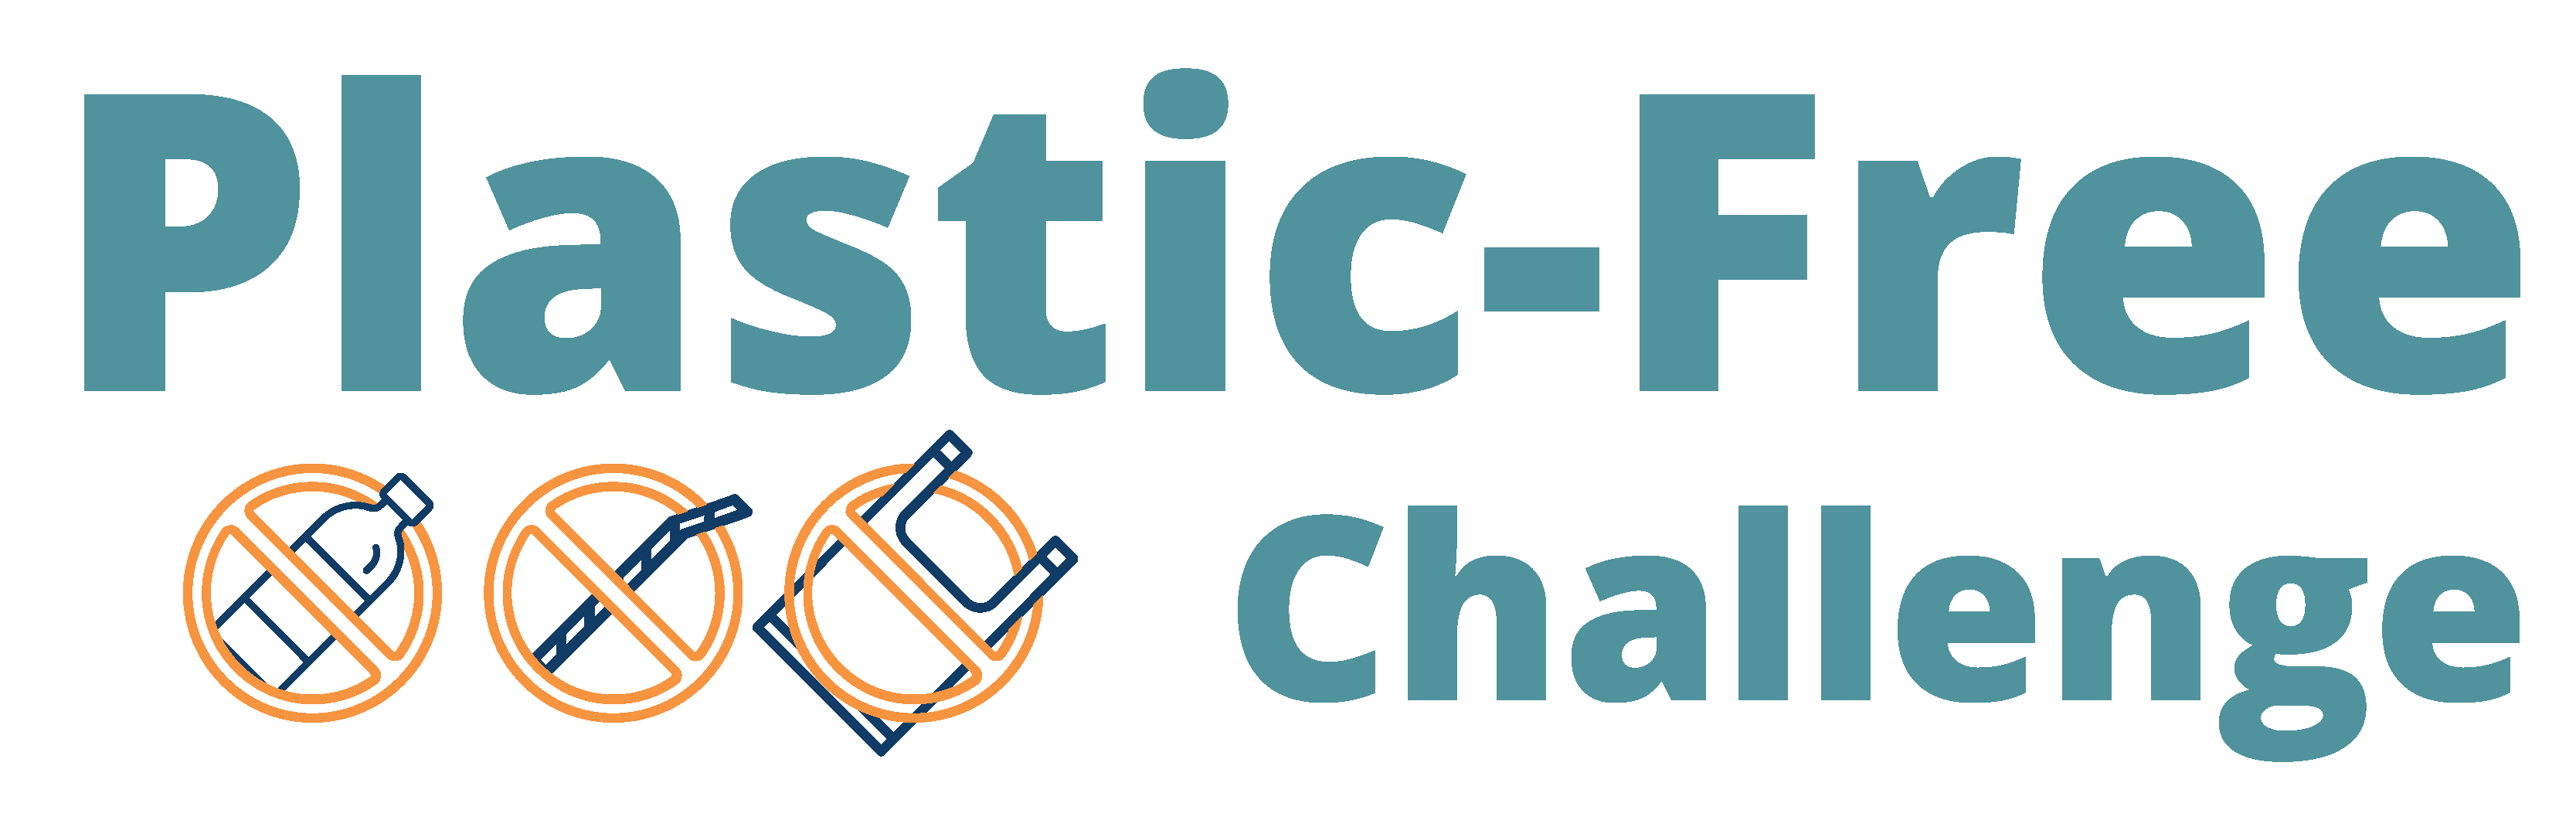 Plastic-Free Challenge - About